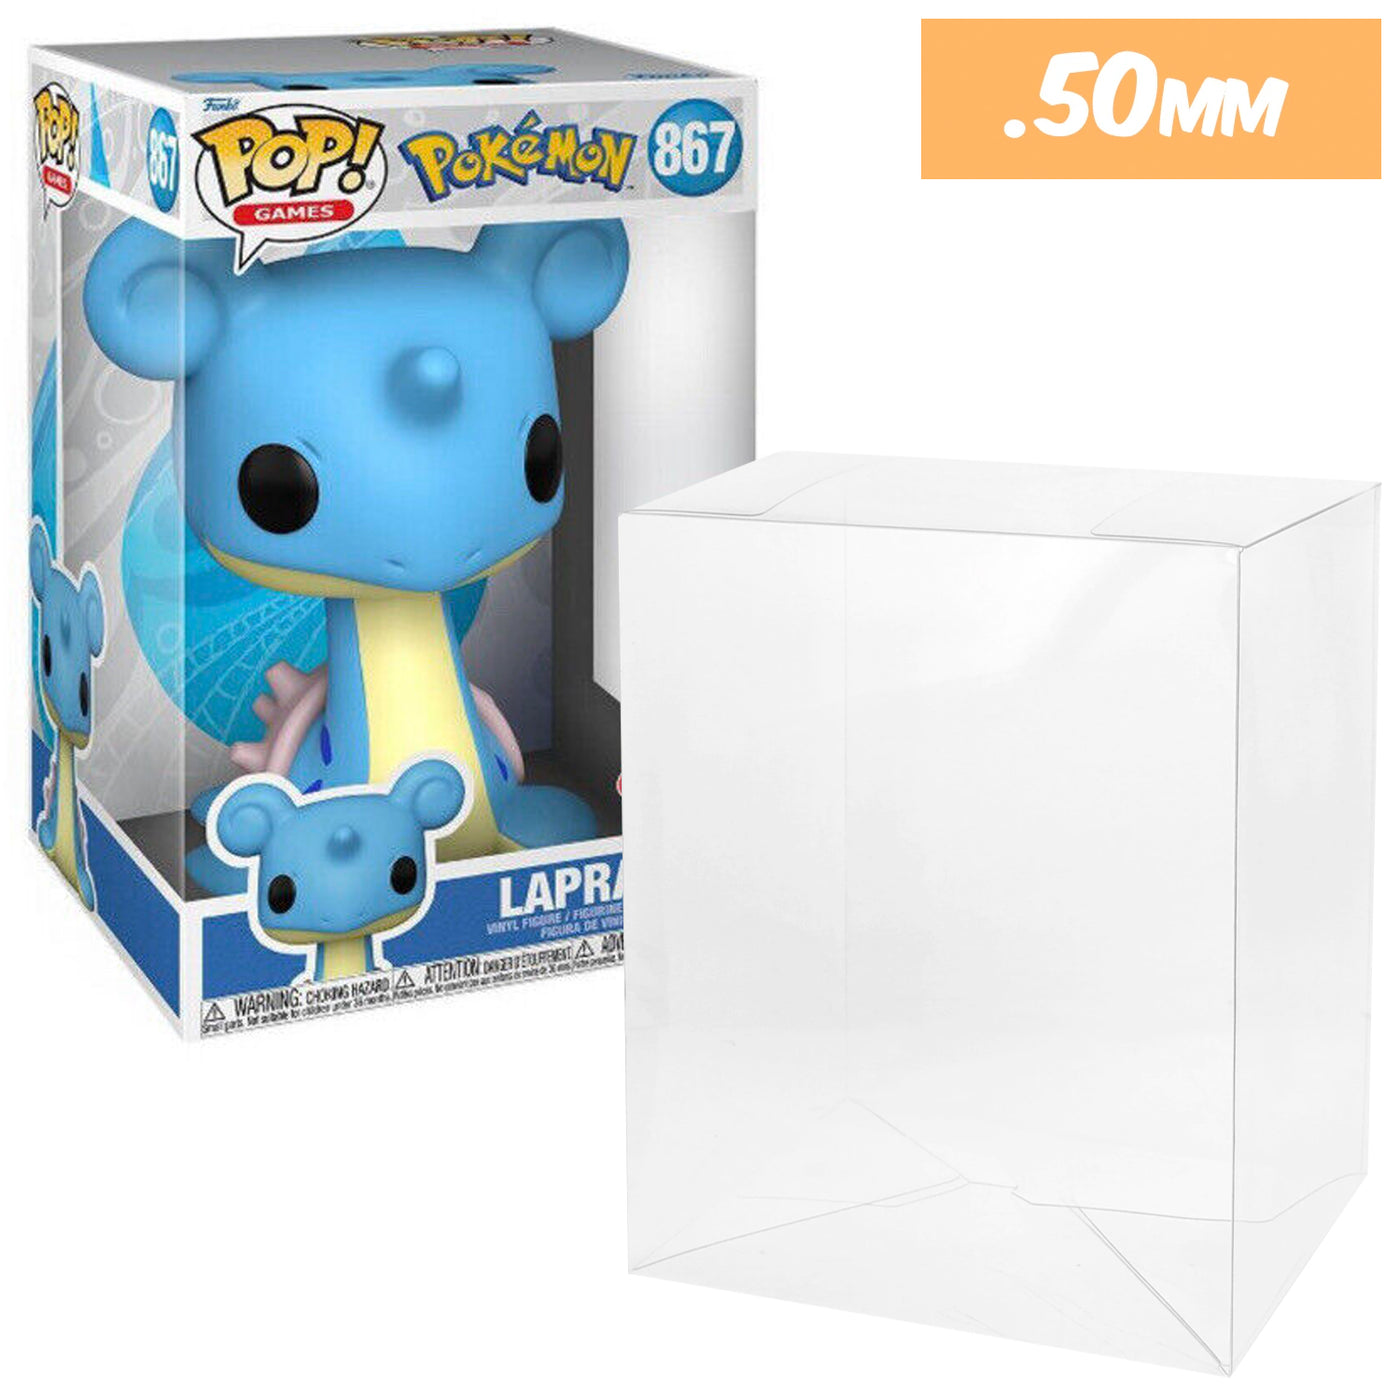 10 inch new size pokemon lapras best funko pop protectors thick strong uv scratch flat top stack vinyl display geek plastic shield vaulted eco armor fits collect protect display case kollector protector